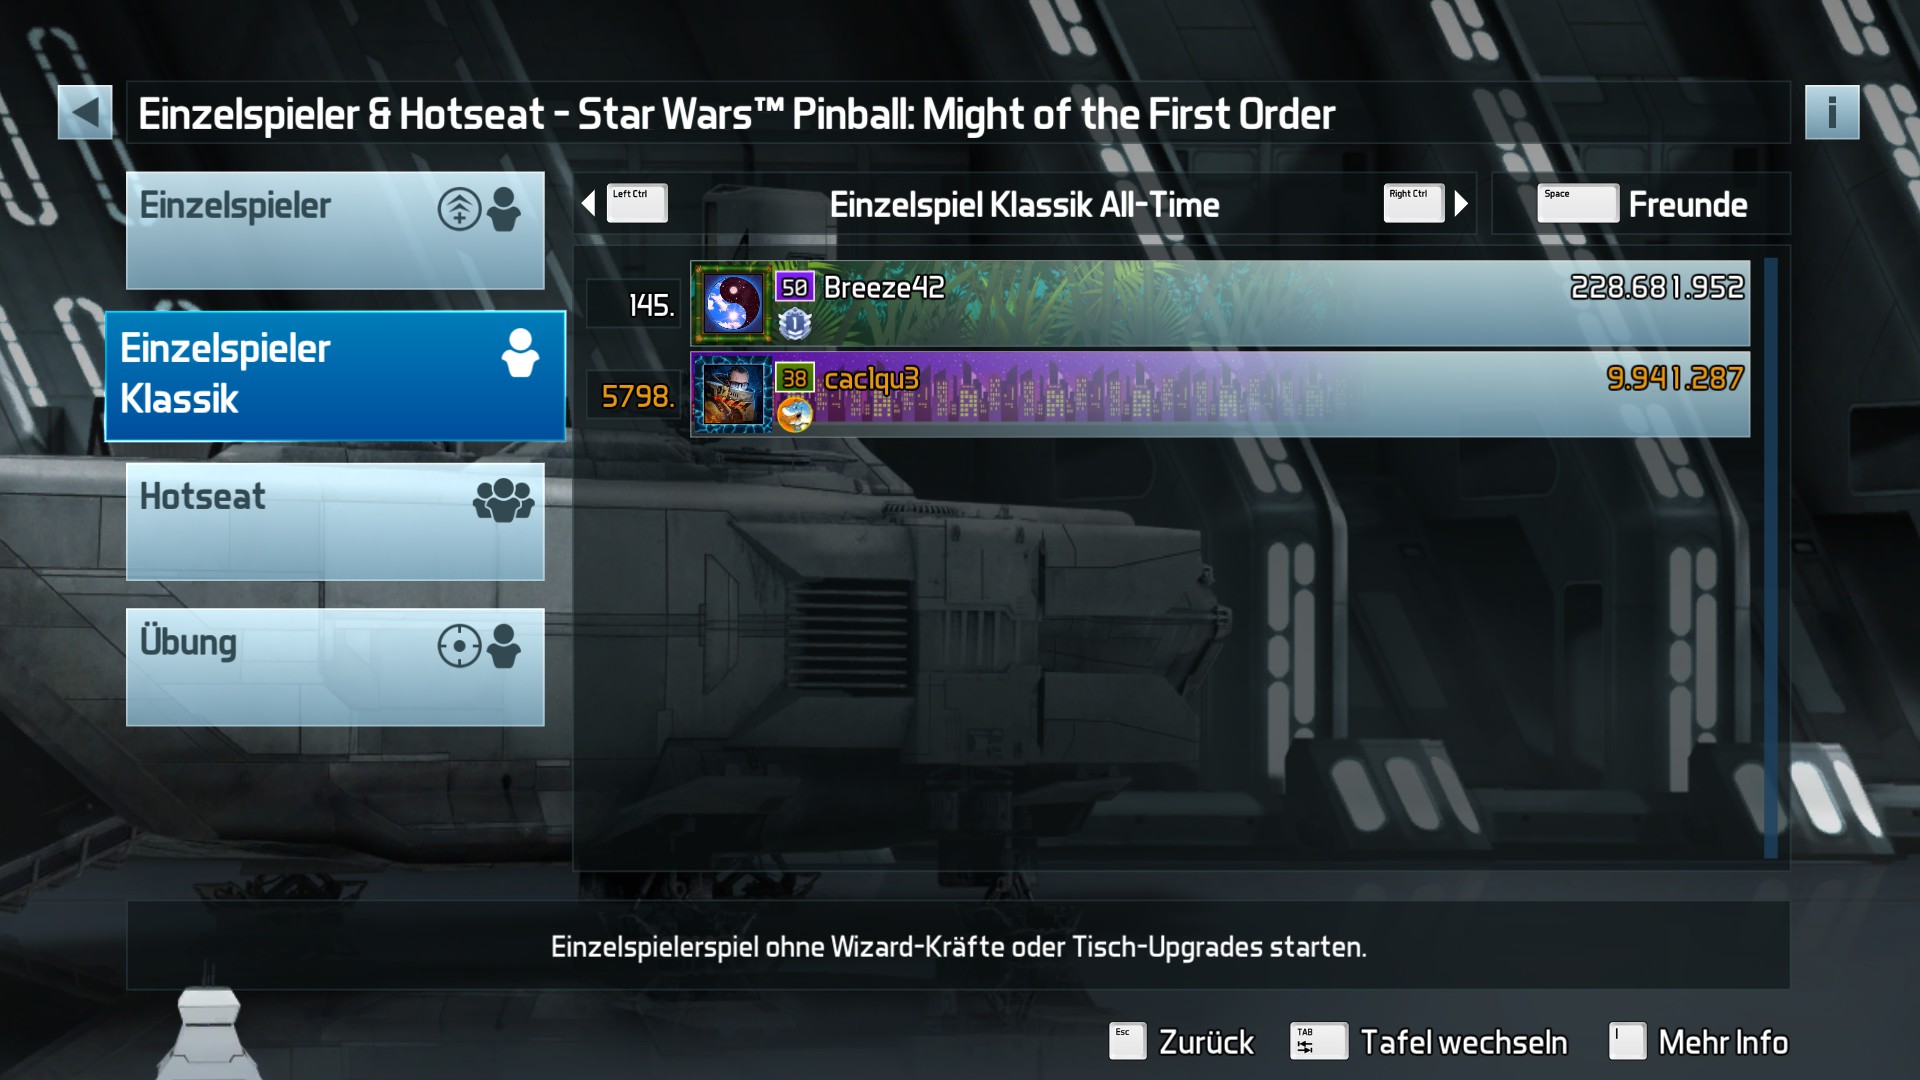 e2e4: Pinball Fx3: Star Wars Pinball: Might Of The First Order [Classic] (PC) 9,941,287 points on 2022-05-12 22:20:00